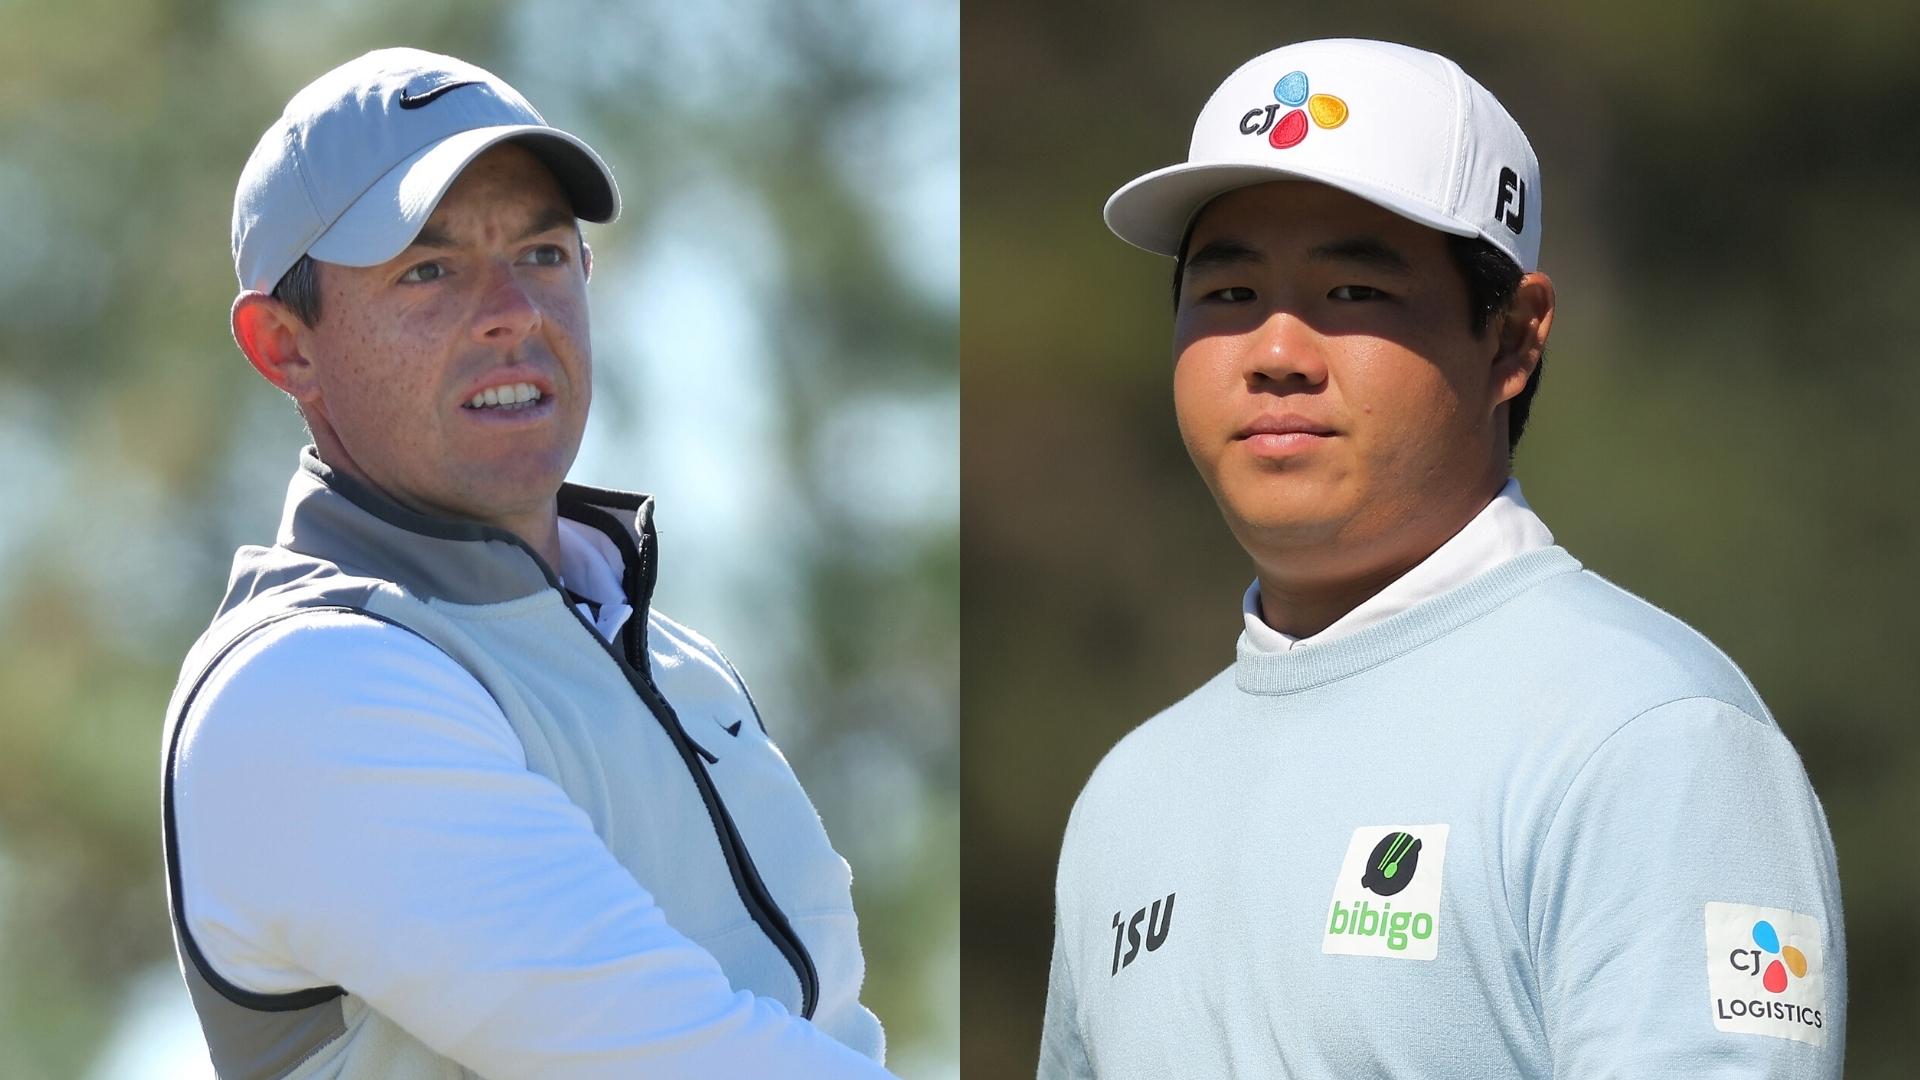 Tom Kim invaded Rory McIlroy’s press conference and left with some memorable advice